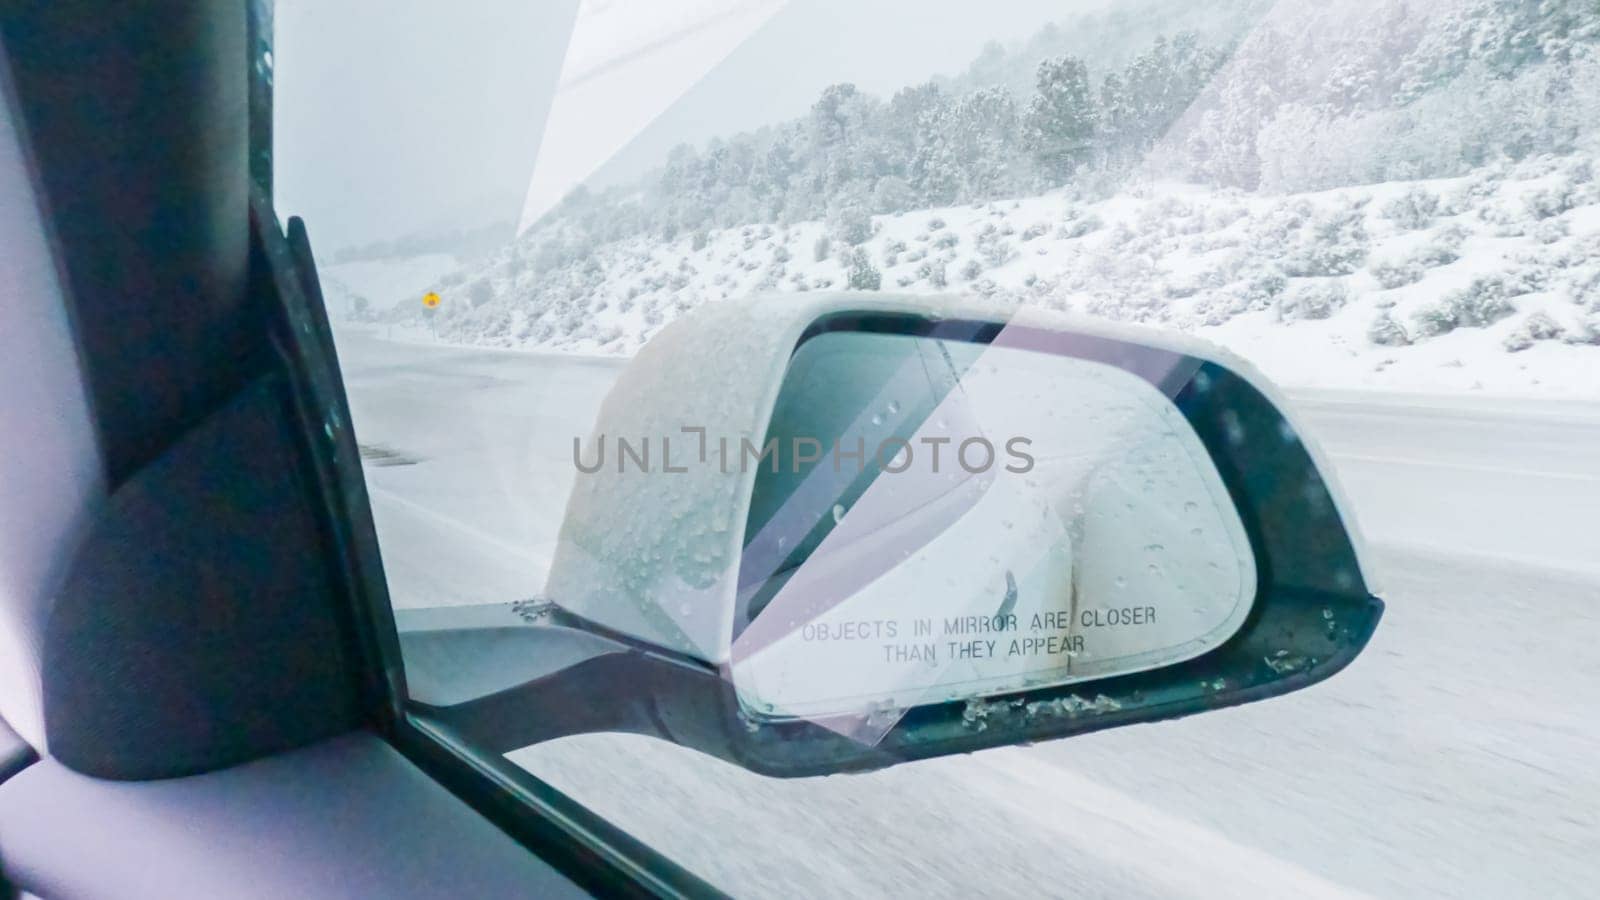 Braving a Winter Storm Driving Through Western Colorado by arinahabich